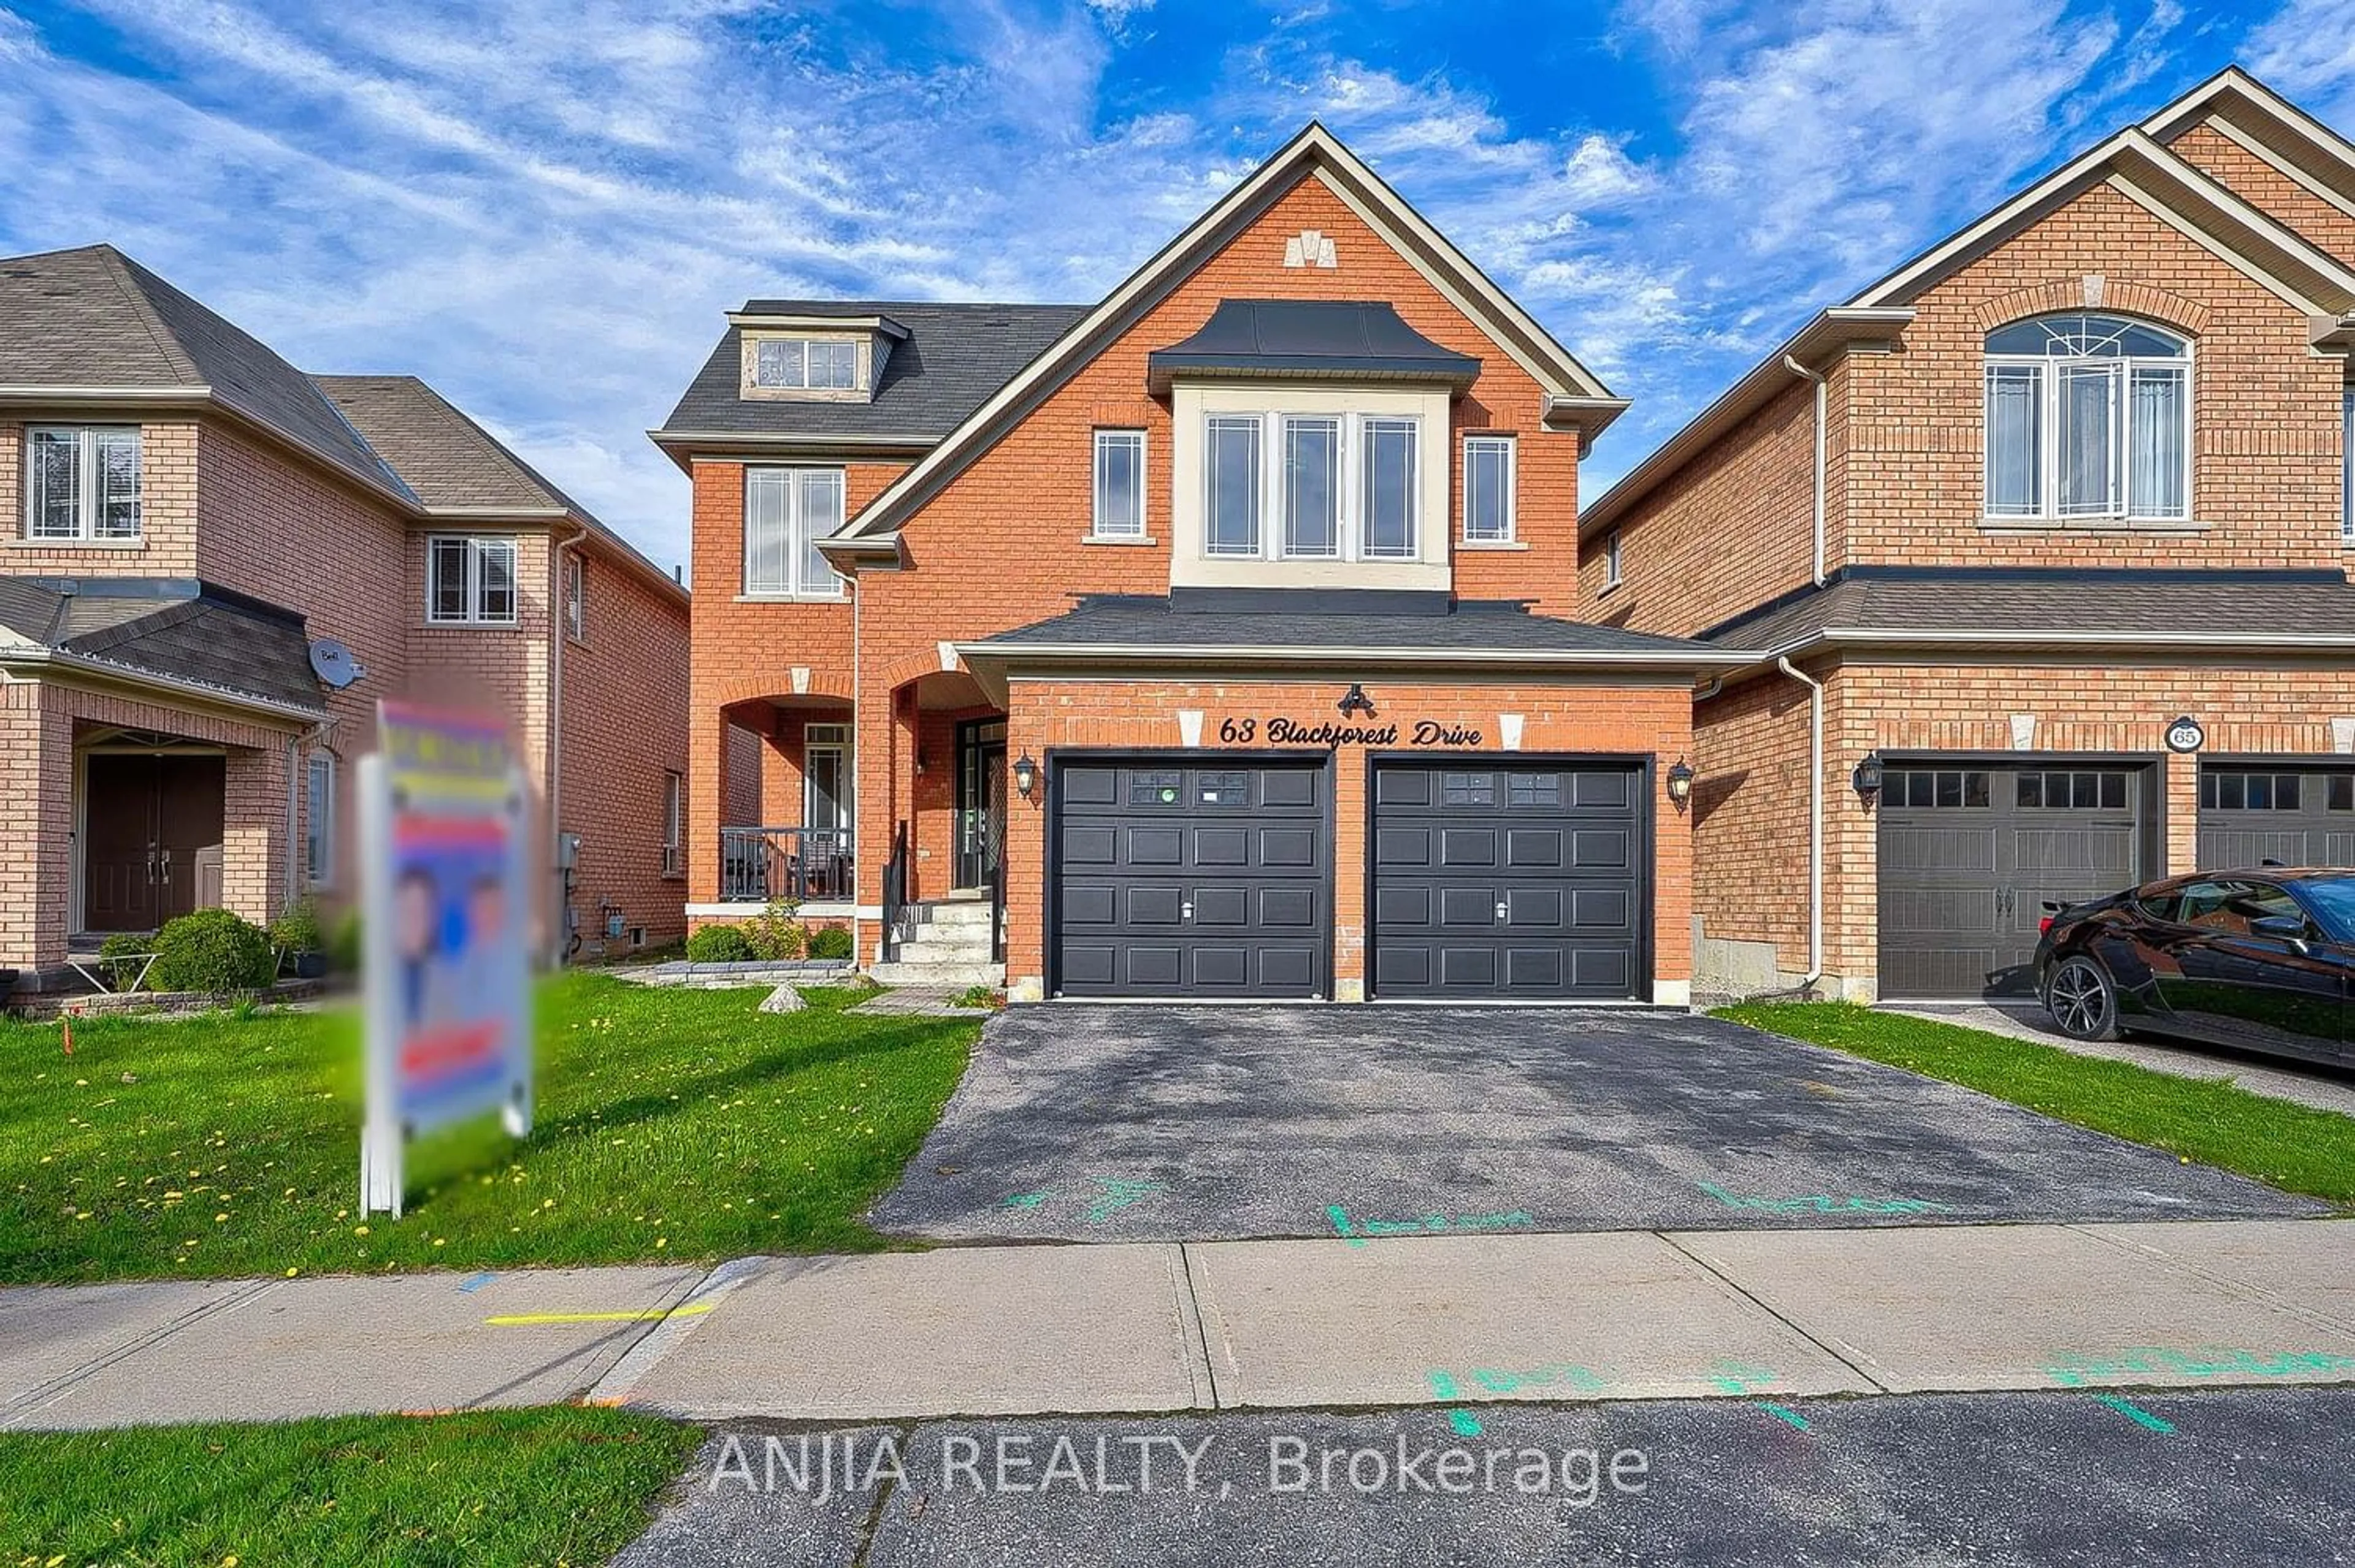 Home with brick exterior material for 63 Blackforest Dr, Richmond Hill Ontario L4E 4R5